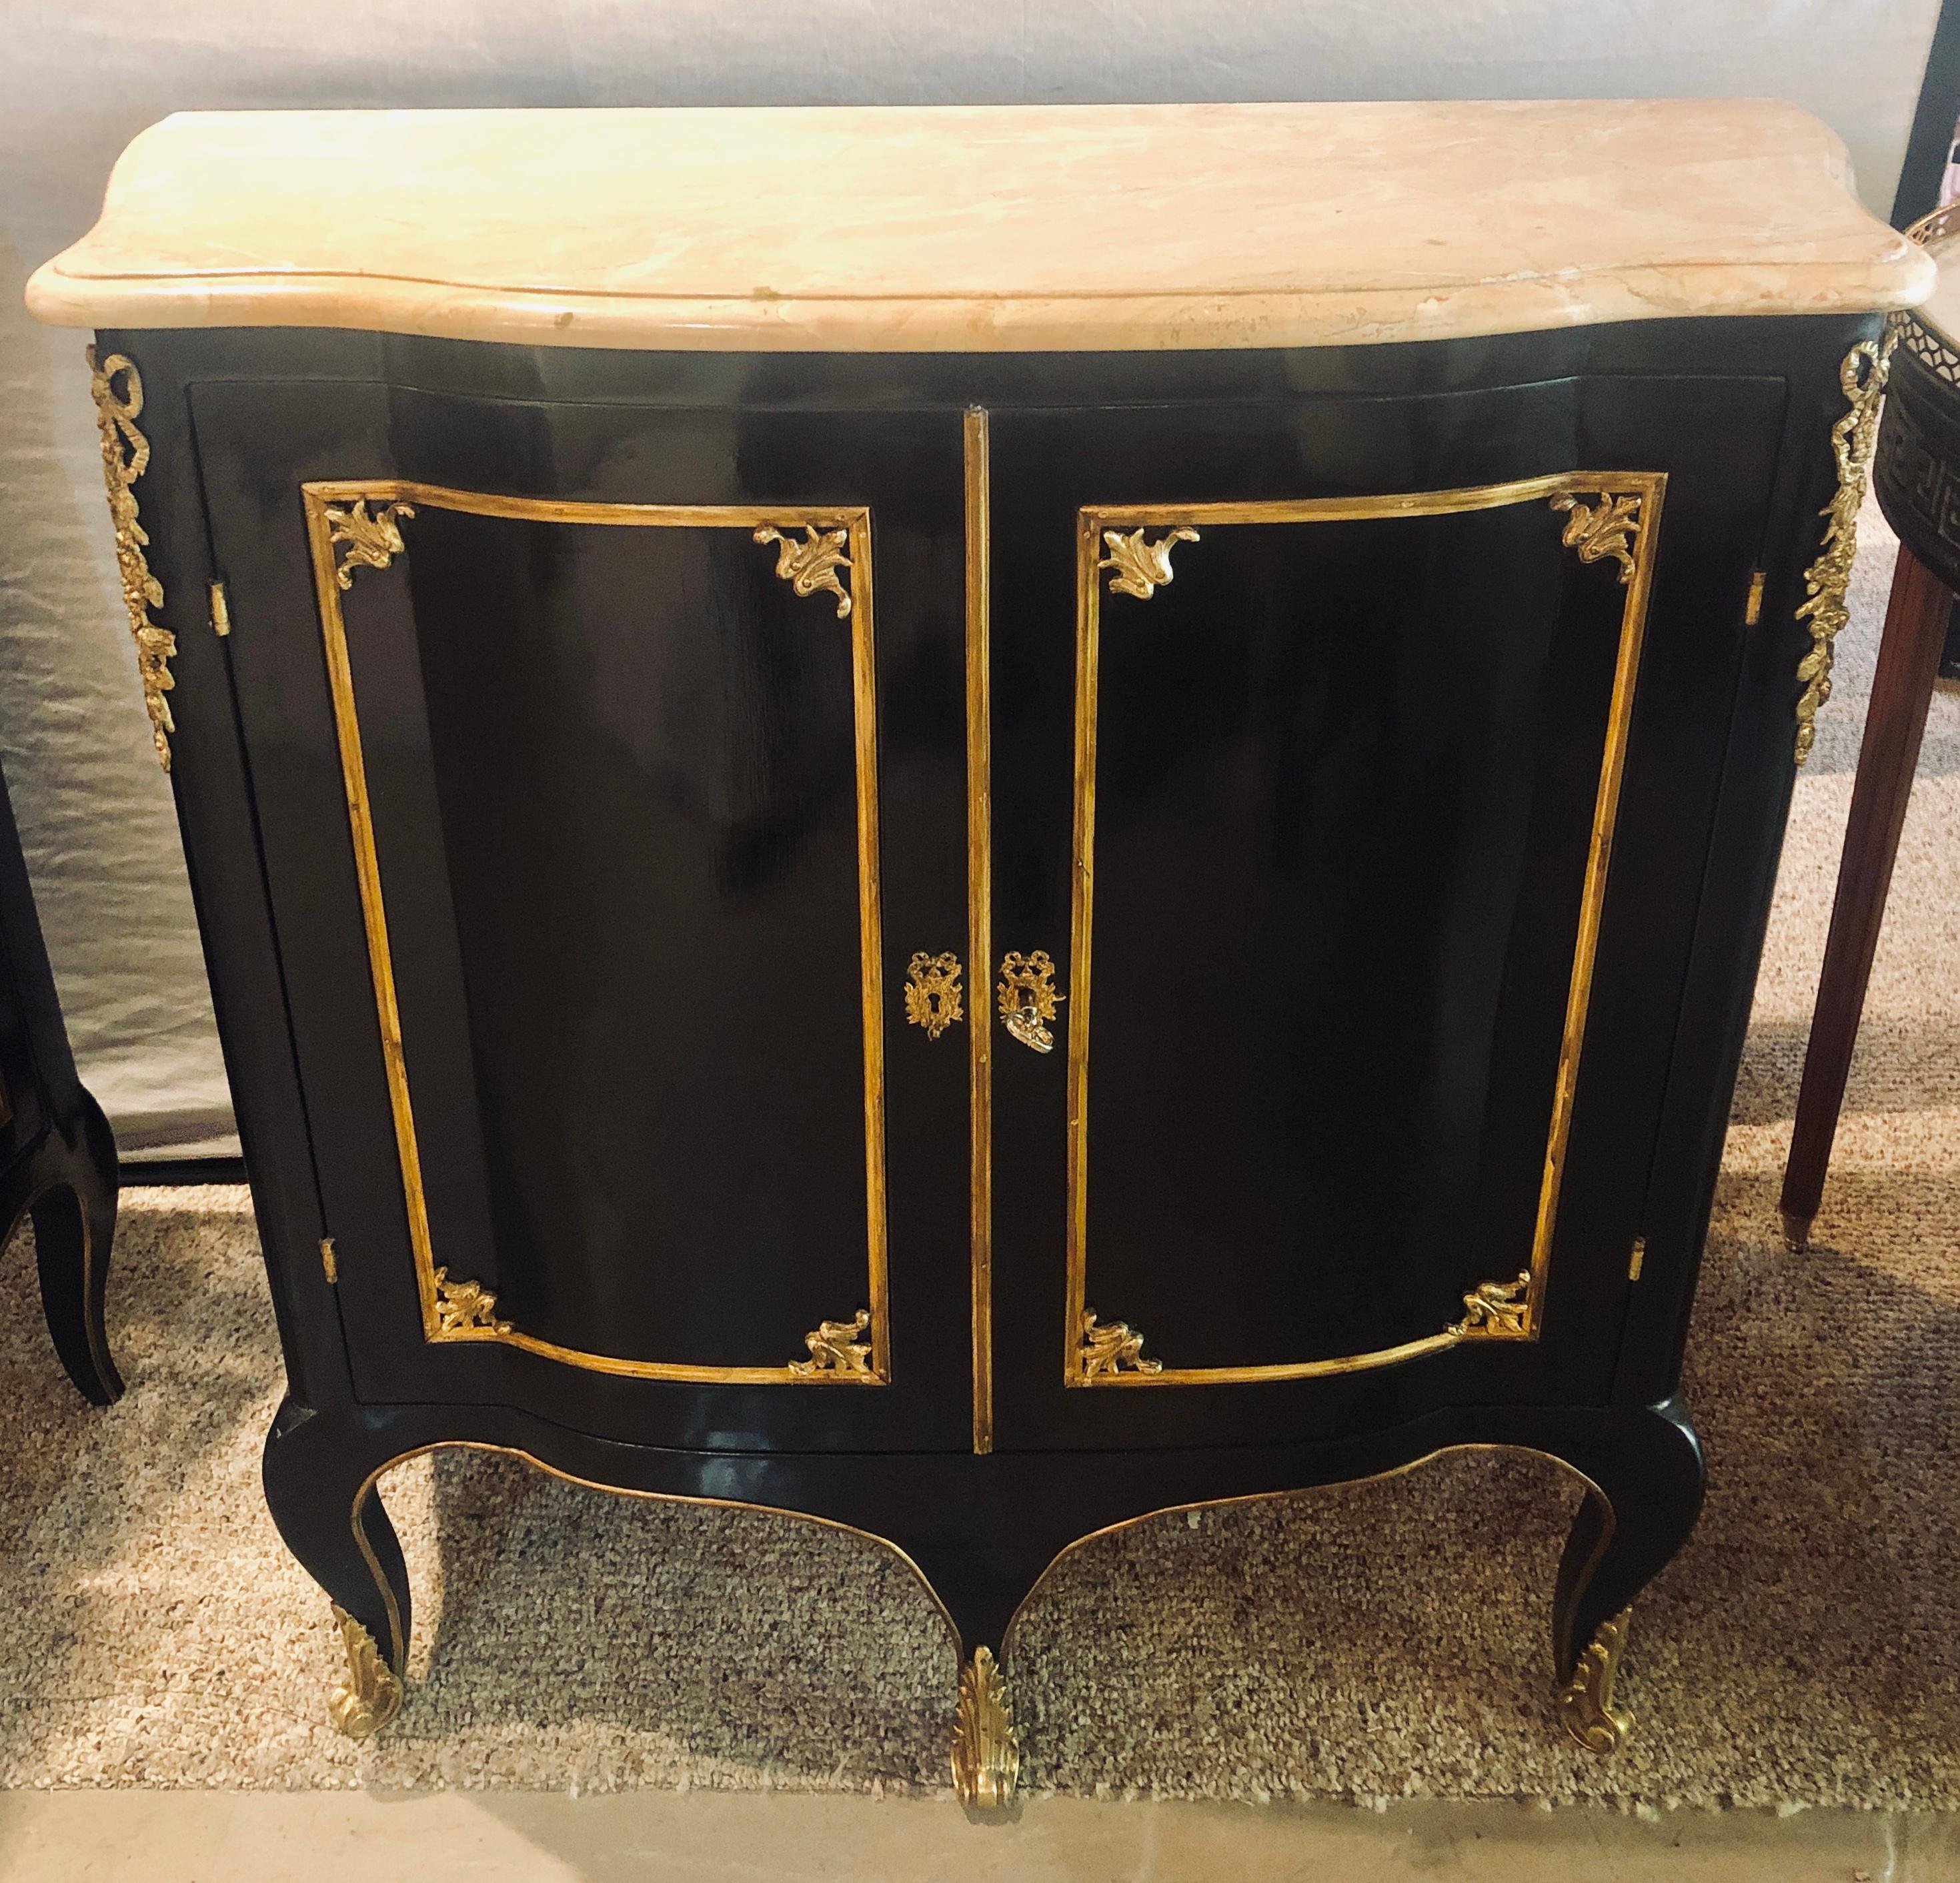 Hollywood Regency style cabinets in manner of Jansen a pair. This fine and custom pair of oak secondary cabinets. Commodes or nightstands have full bronze locks and fitted shelf interiors. The ebony finish having double serpentine fronts with bronze